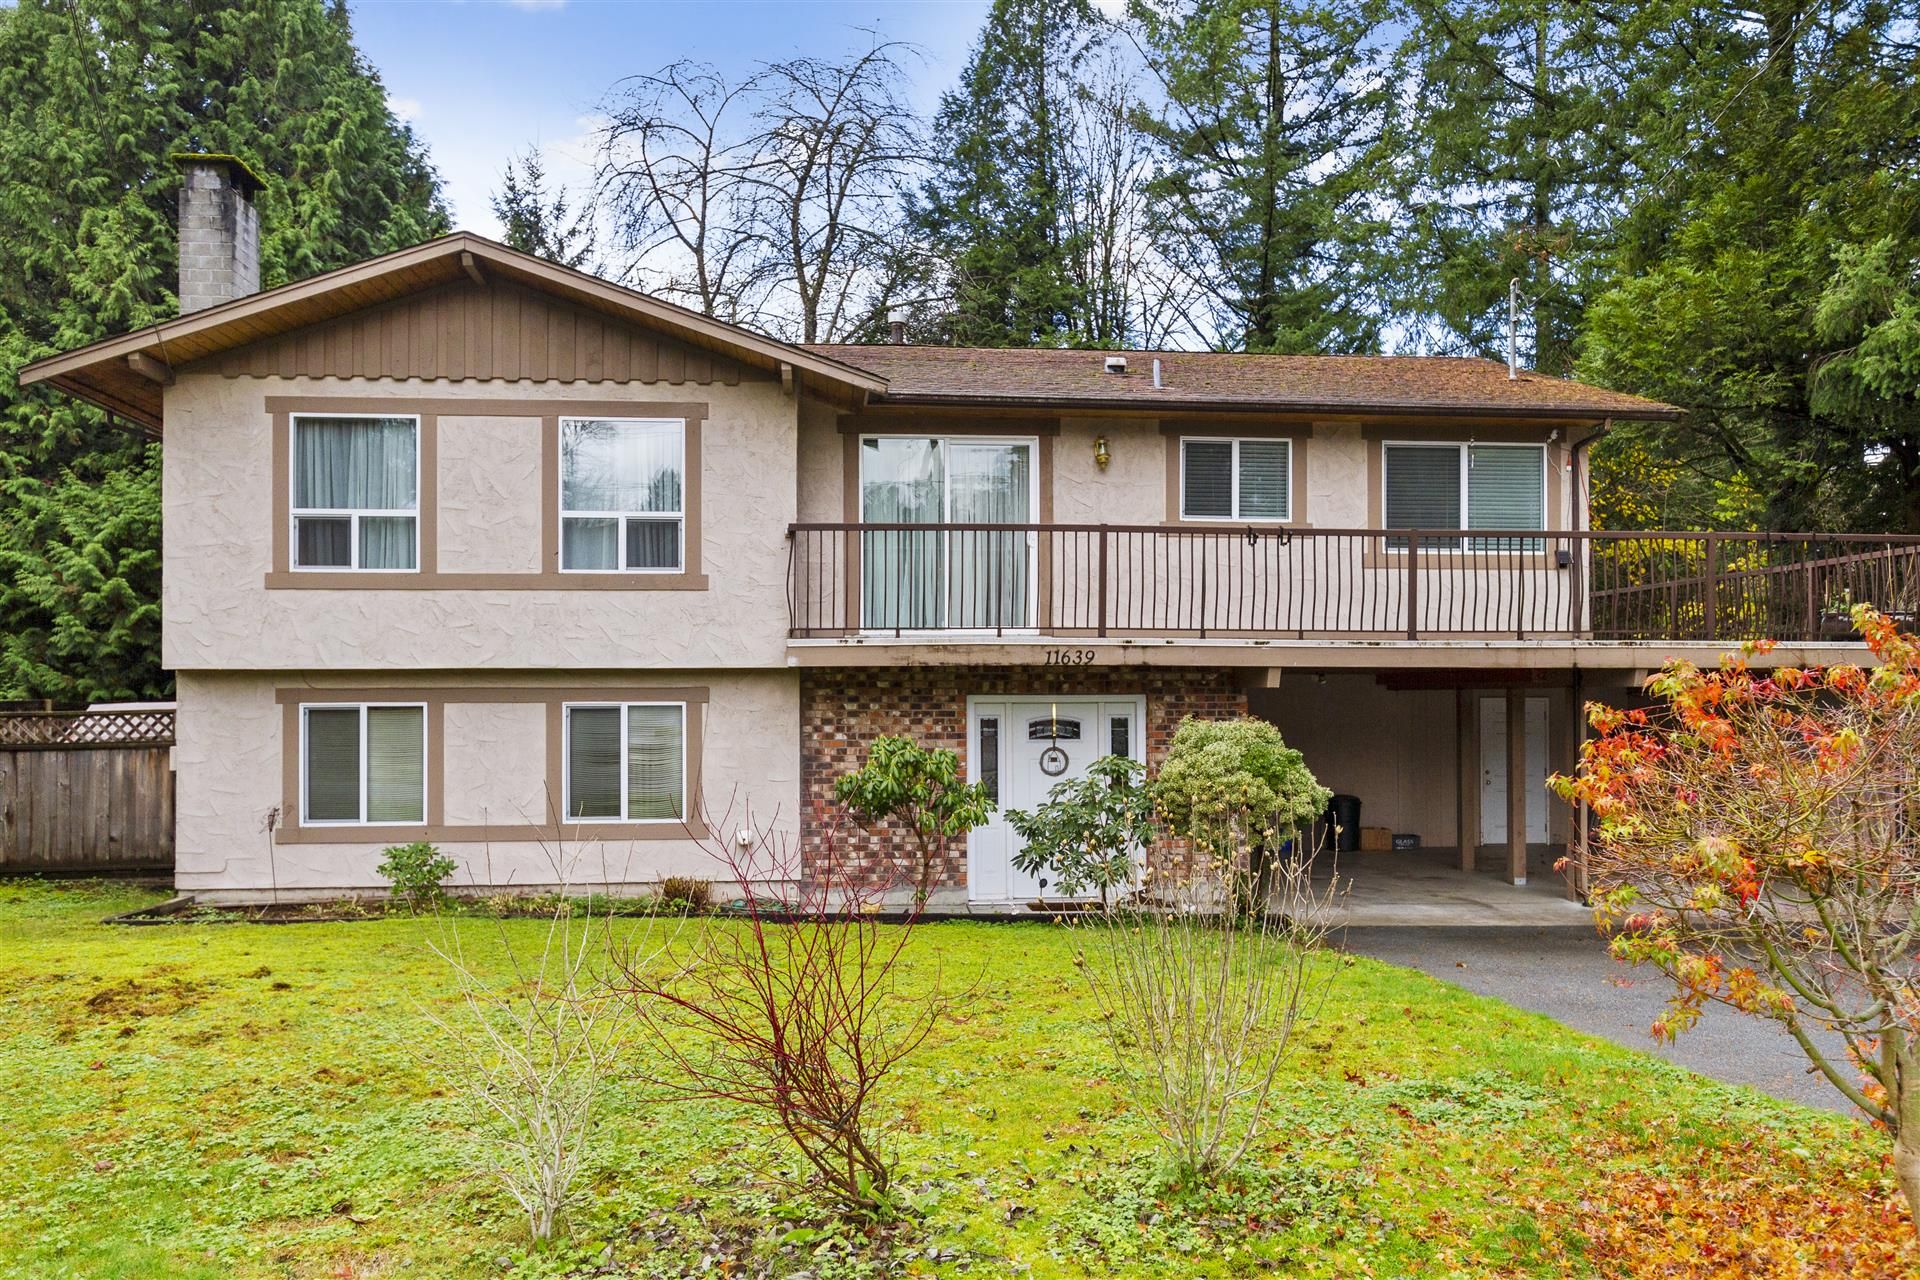 Greg & Colin Thornton HAVE JUST SOLD ANOTHER property at 11639 River Wynd in Maple Ridge 